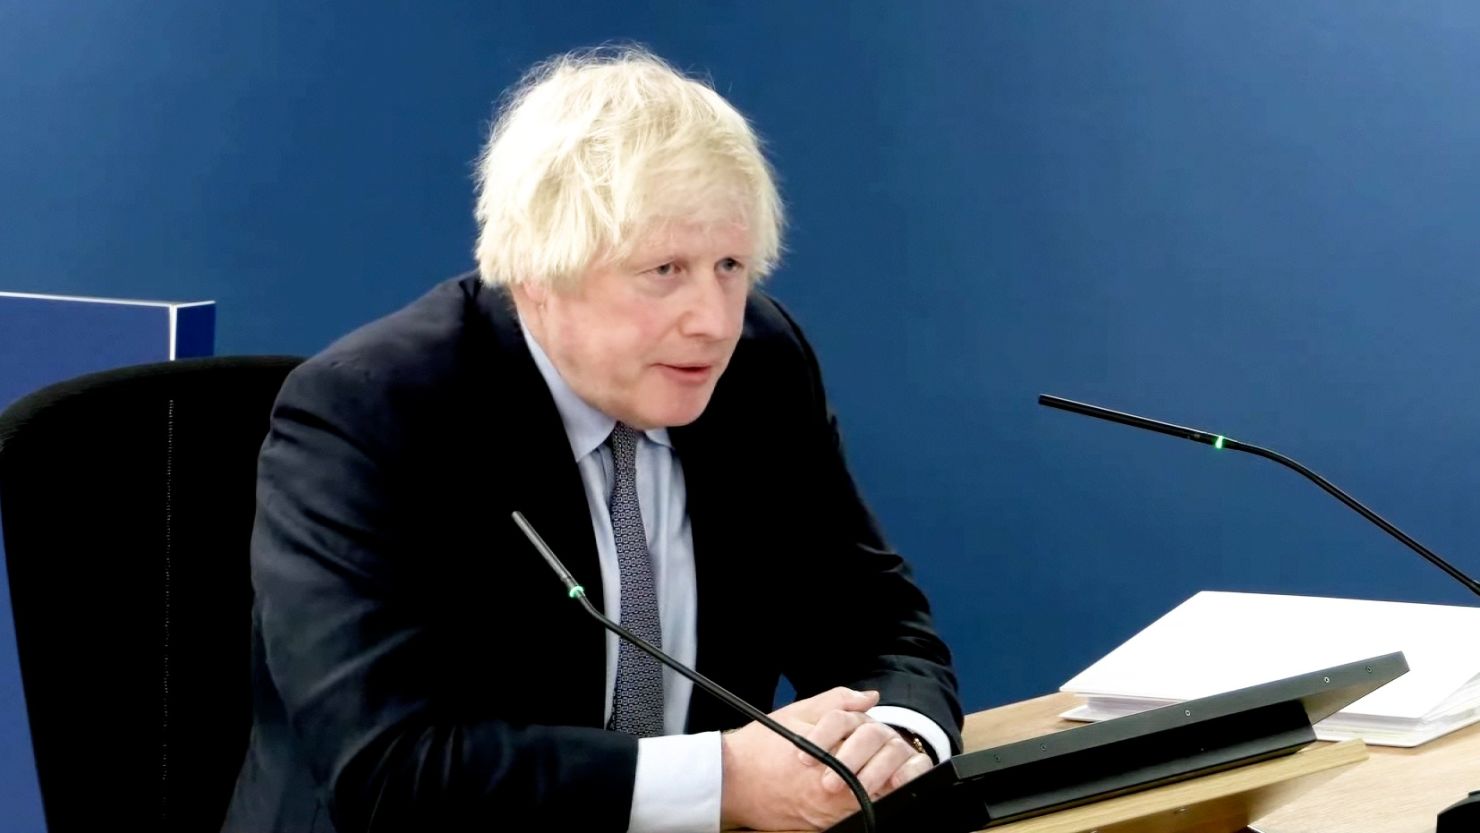 UK News Today: Boris Johnson grilled at Covid inquiry